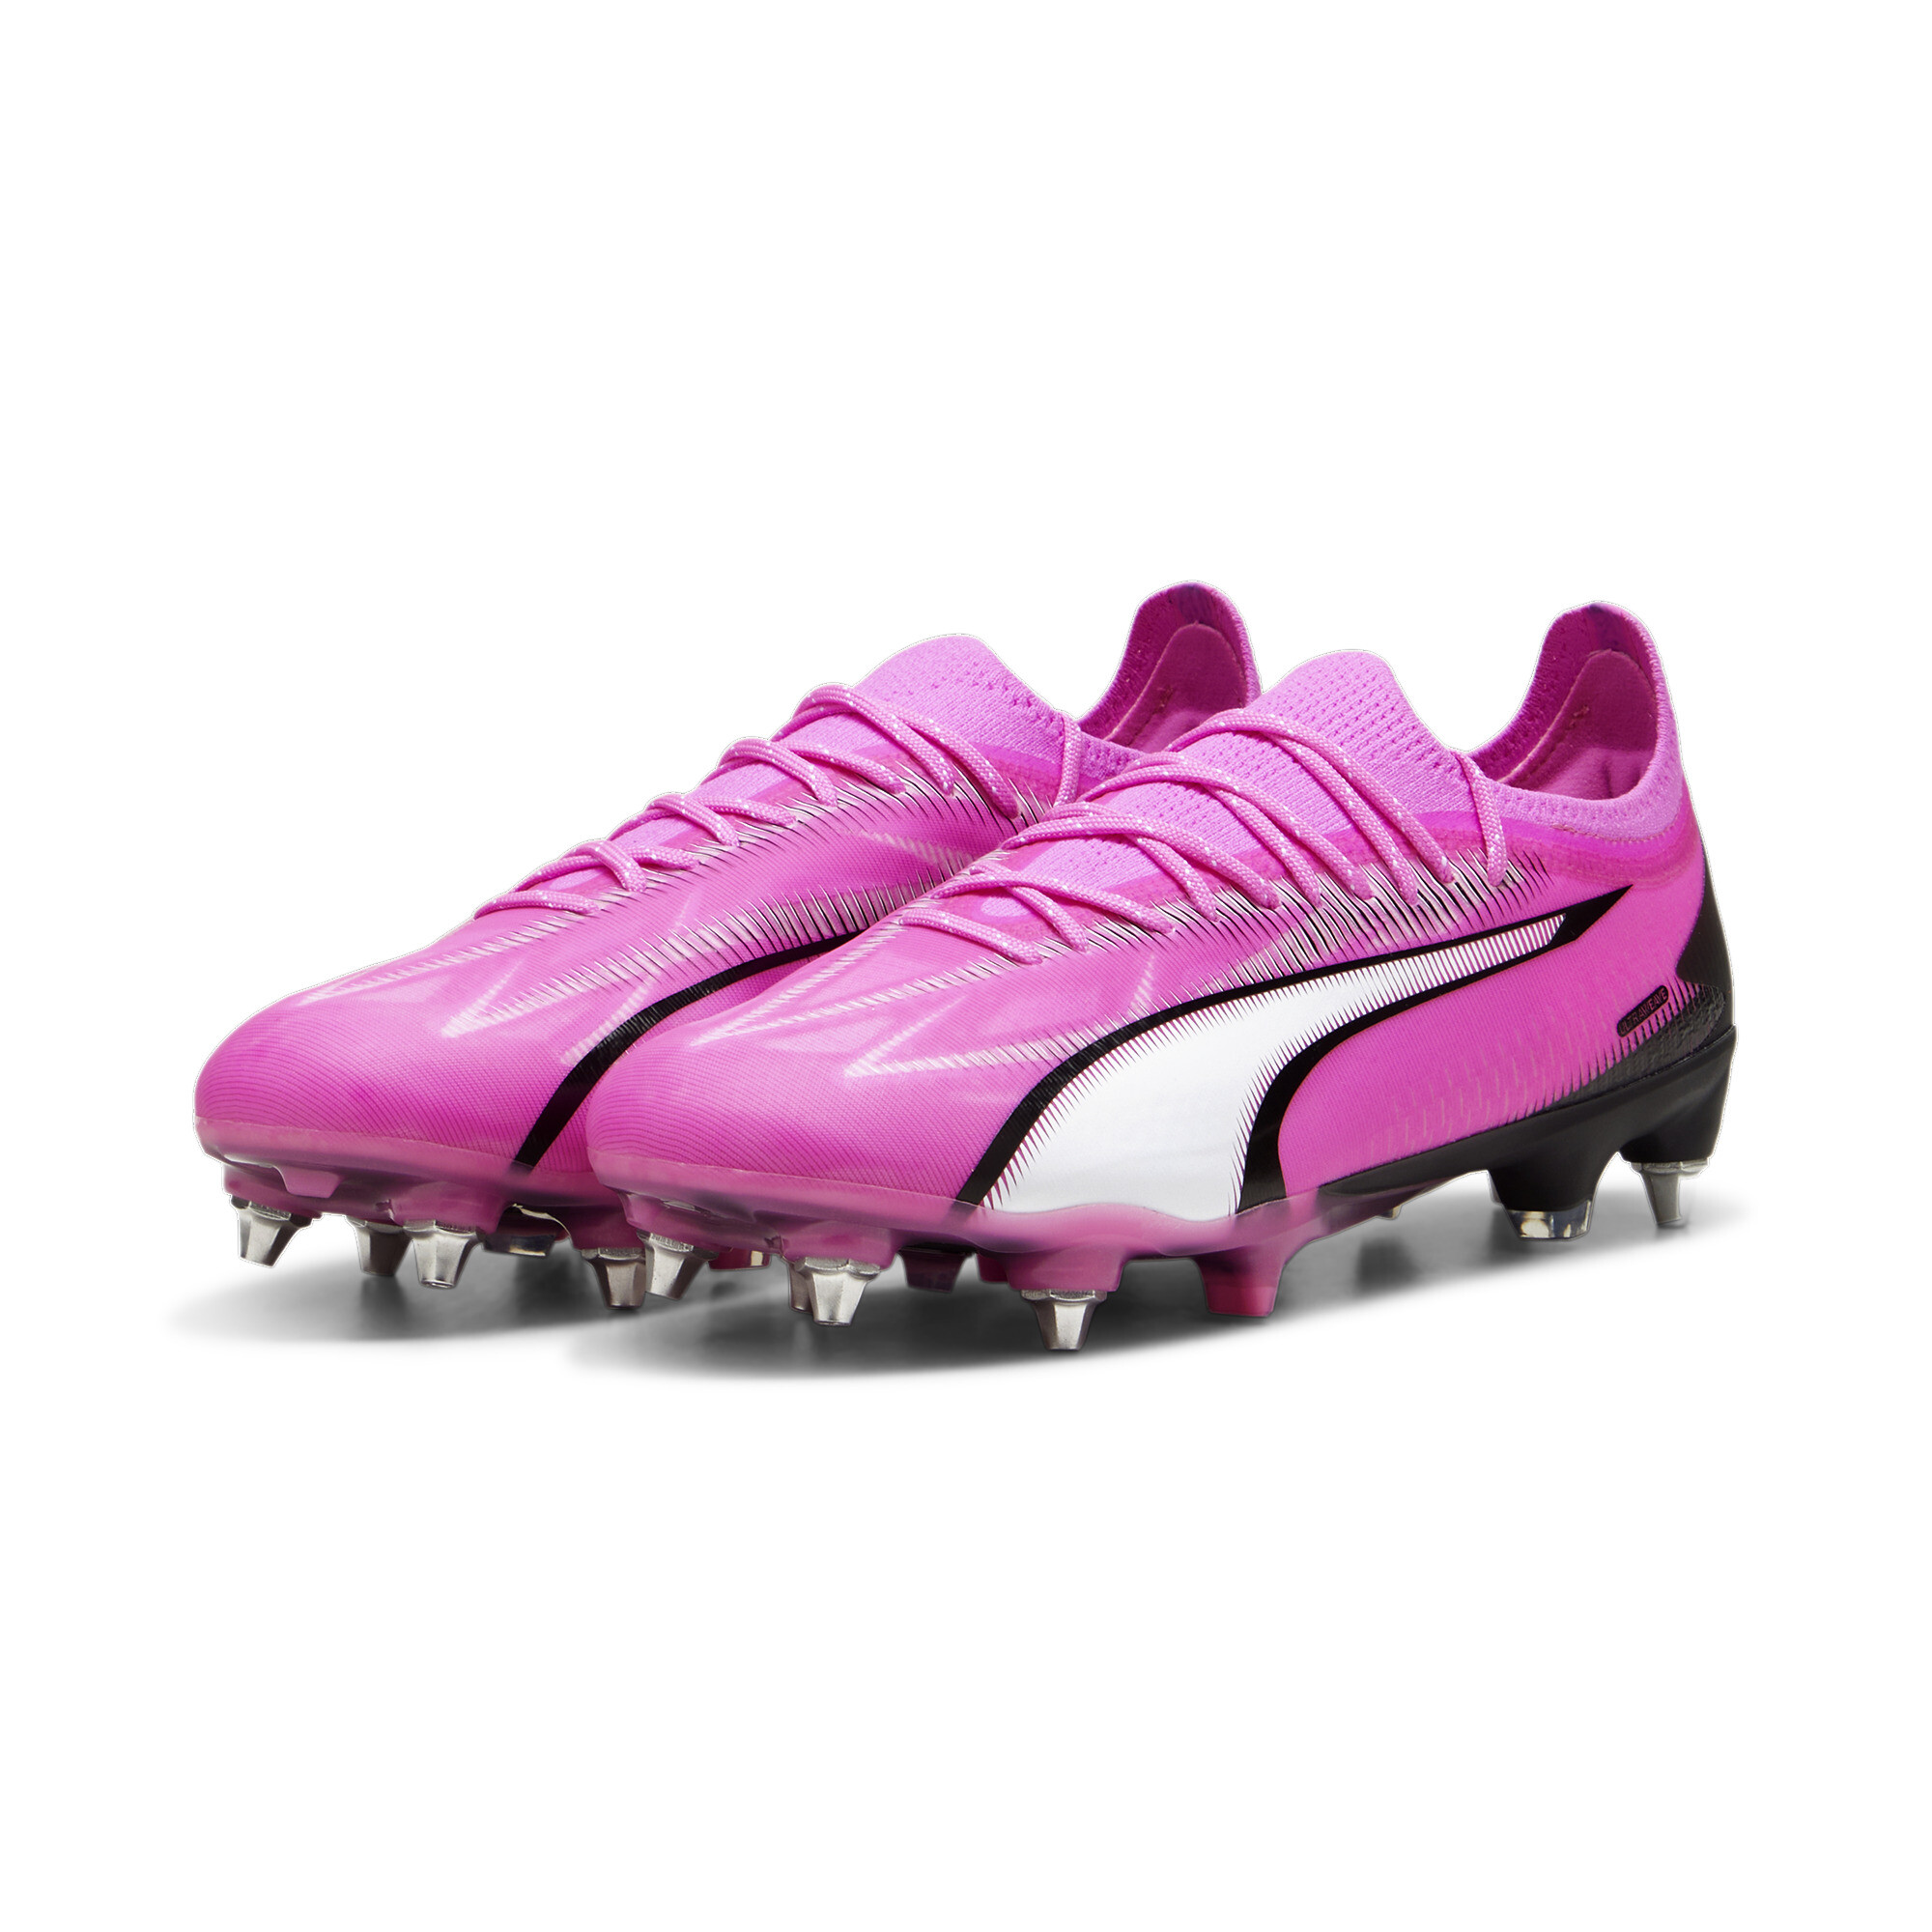 Puma ULTRA ULTIMATE Mx SG Football Boots, Pink, Size 37.5, Shoes